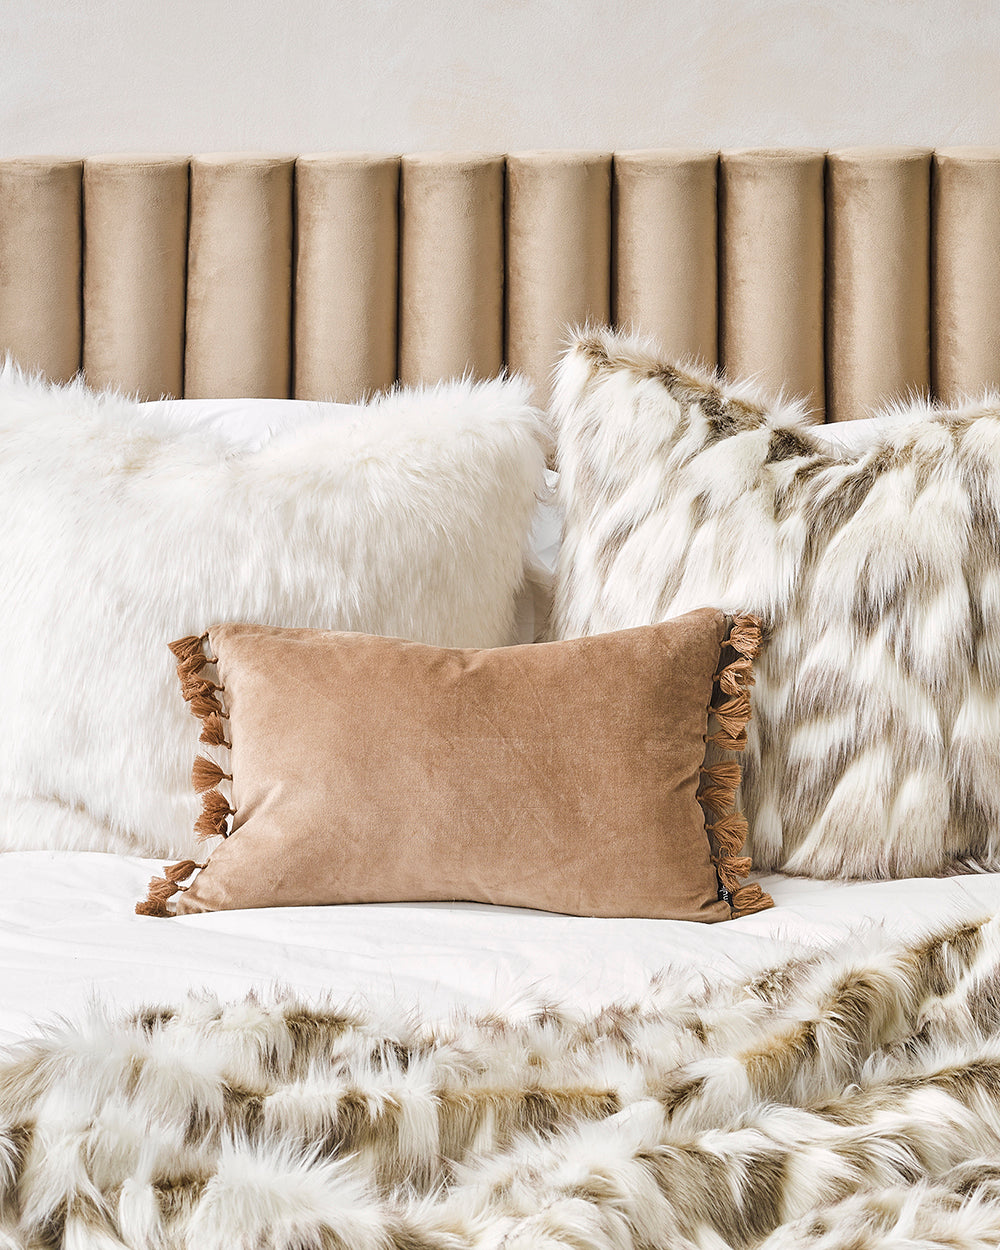 Heirloom Norwegian Fox Cushions in Faux Fur are available from Make Your House A Home Premium Stockist. Furniture Store Bendigo, Victoria. Australia Wide Delivery. Furtex Baya.